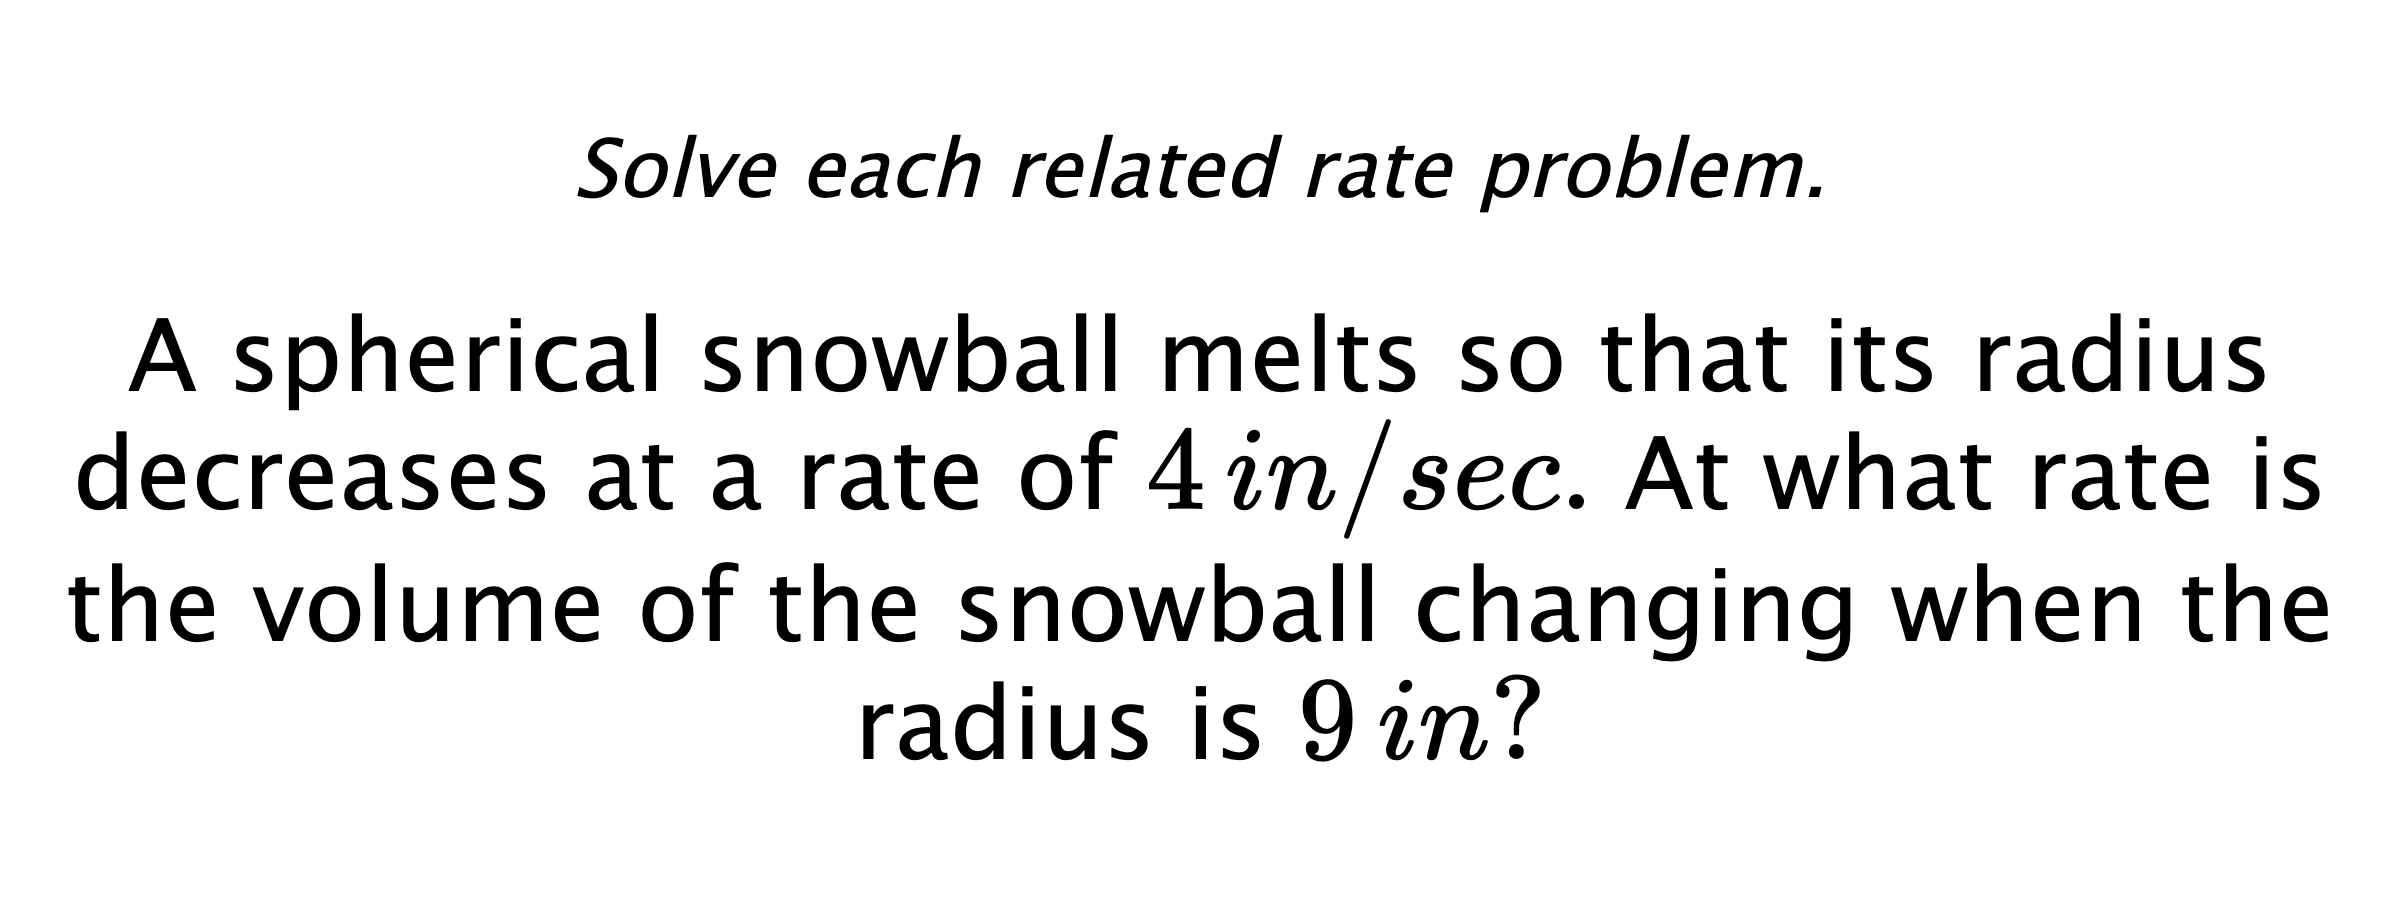 Solve each related rate problem. A spherical snowball melts so that its radius decreases at a rate of $4\,in/sec.$ At what rate is the volume of the snowball changing when the radius is $9\,in?$